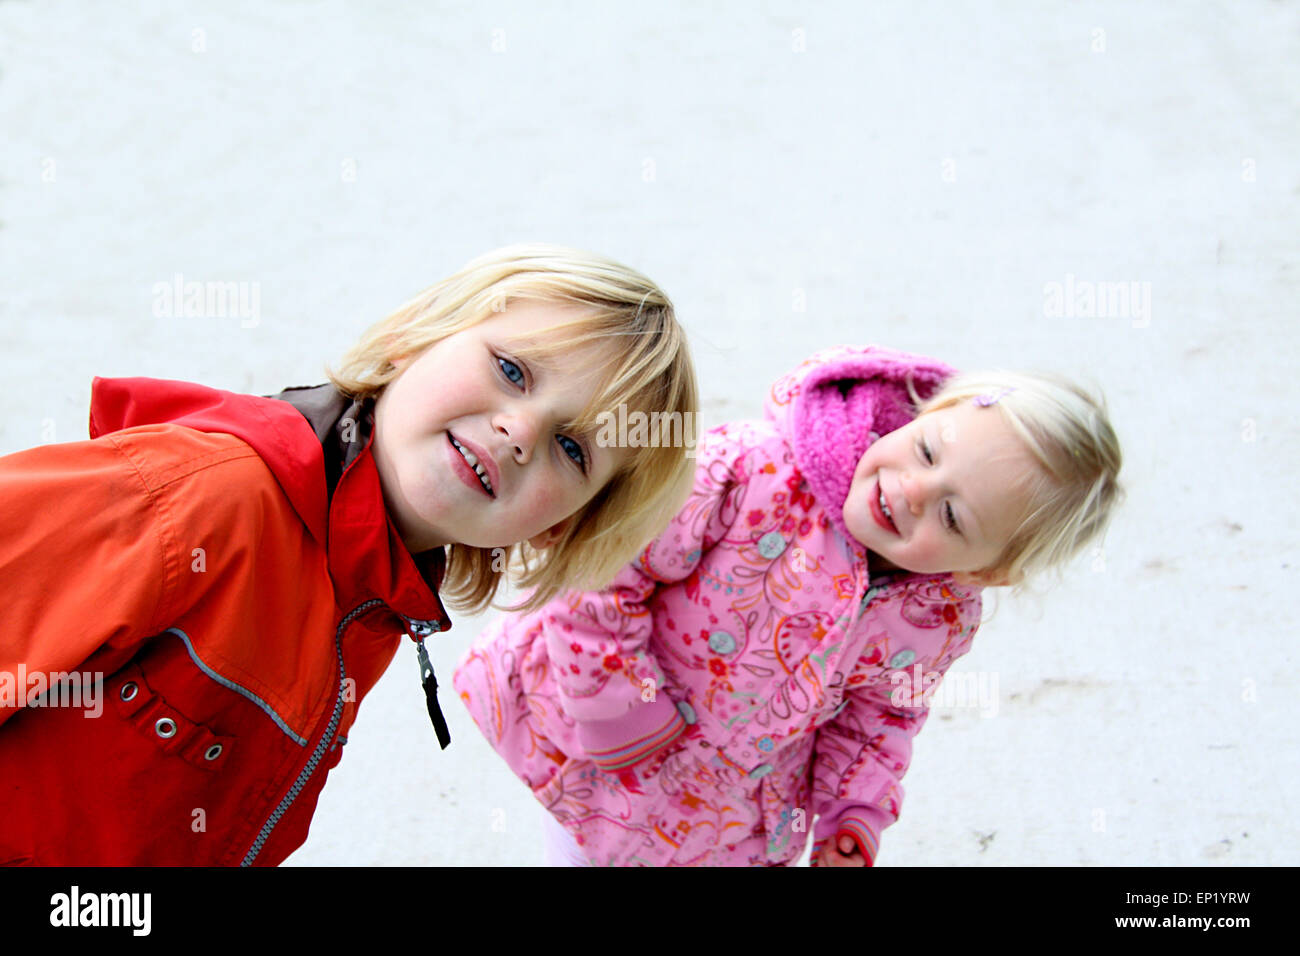 Boy and girl messing about outdoors in winter Stock Photo